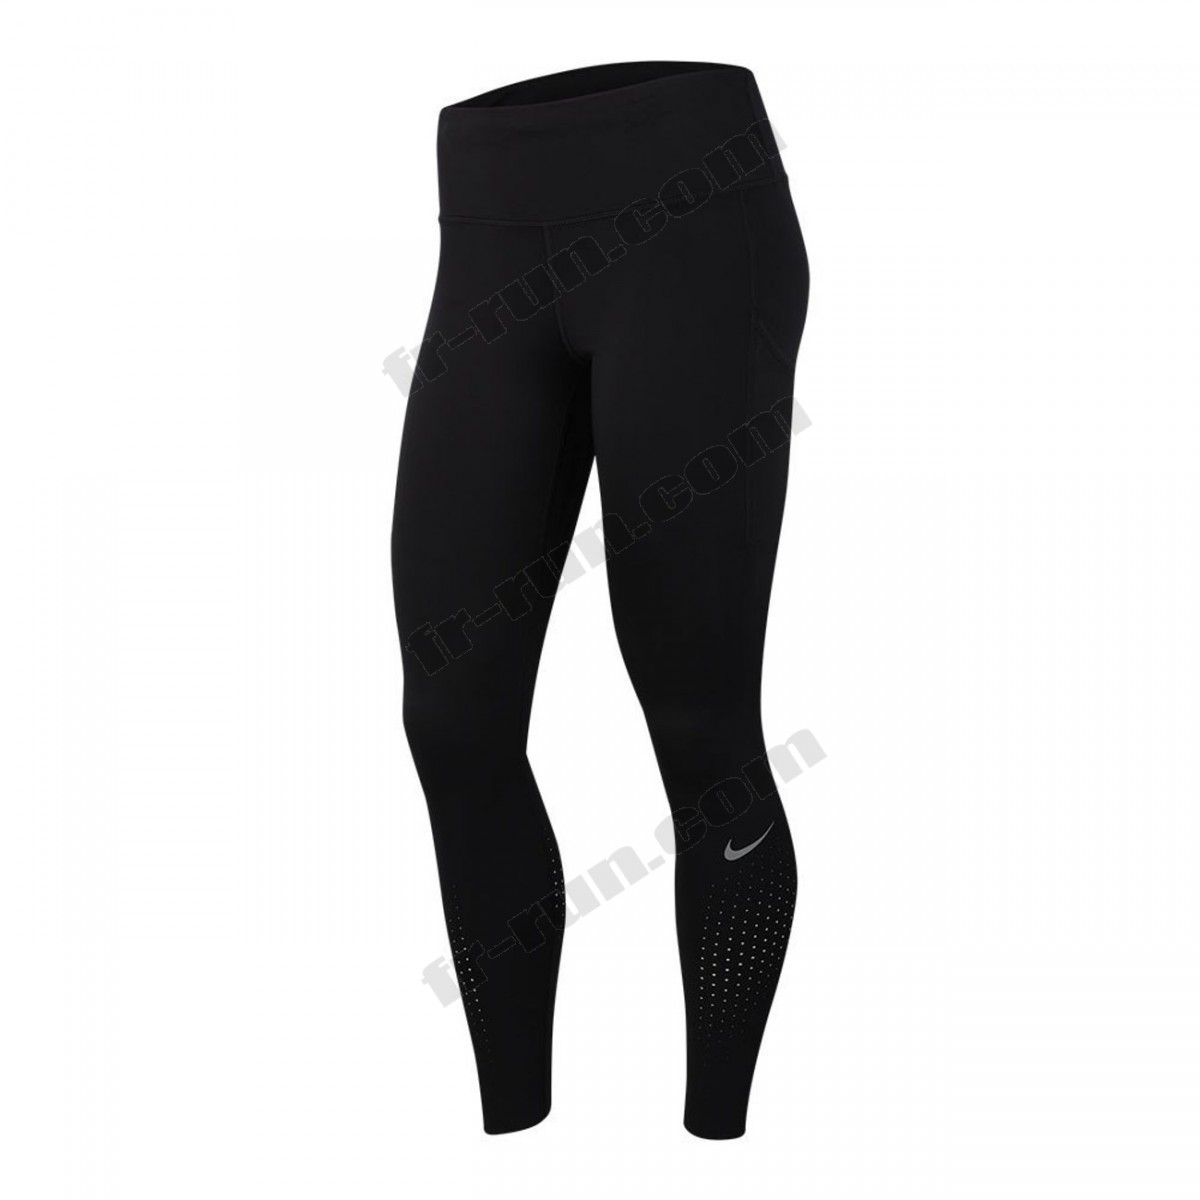 Nike/running femme NIKE Nike Epic Lux Tight W √ Nouveau style √ Soldes - -0